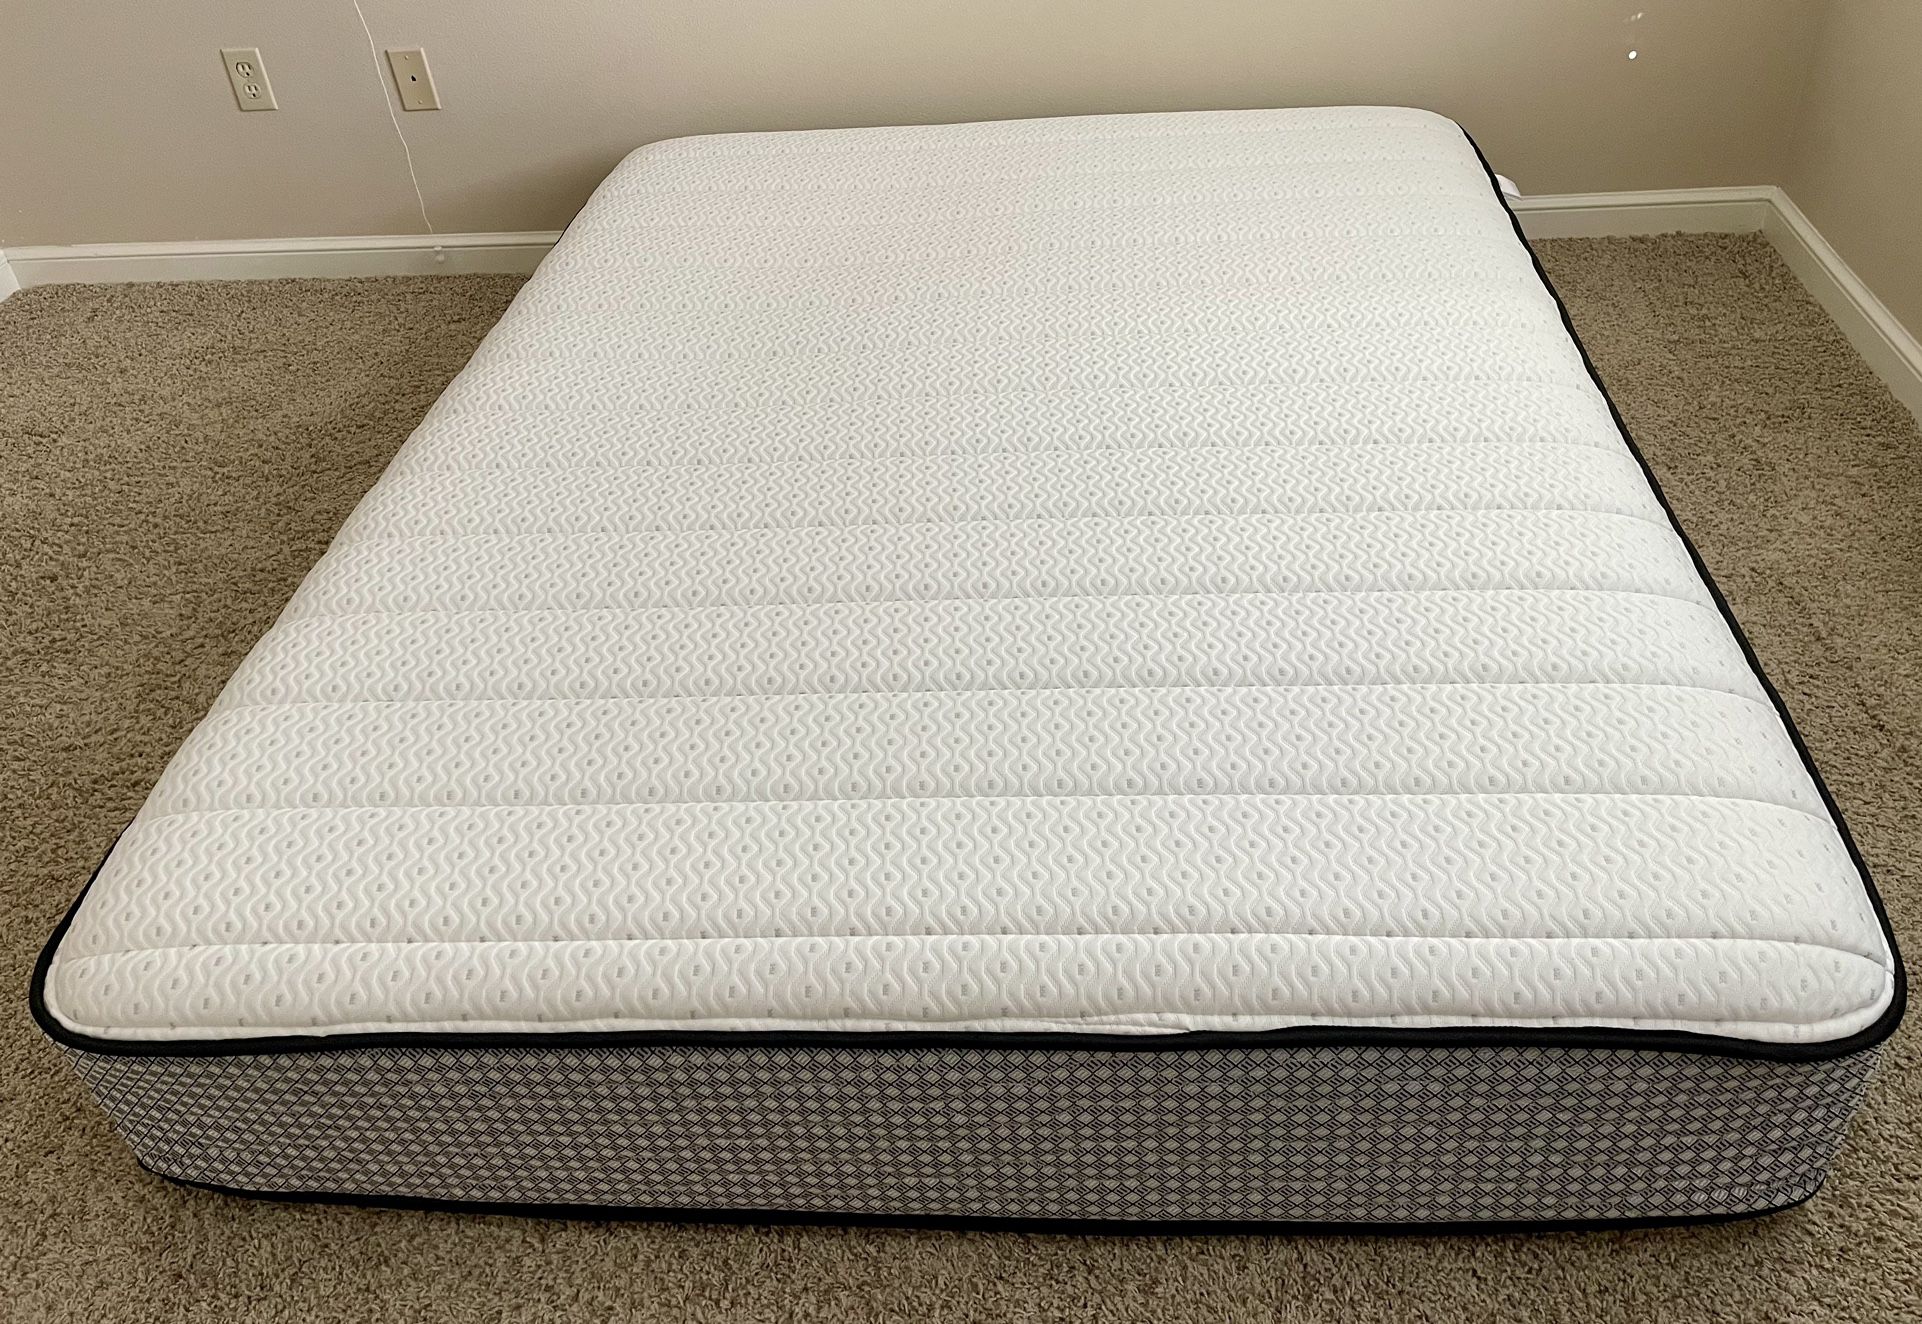 Queen Mattress Pocket Coil Memory Foam: Excellent Condition CLEAN with Queen size Metal Frame